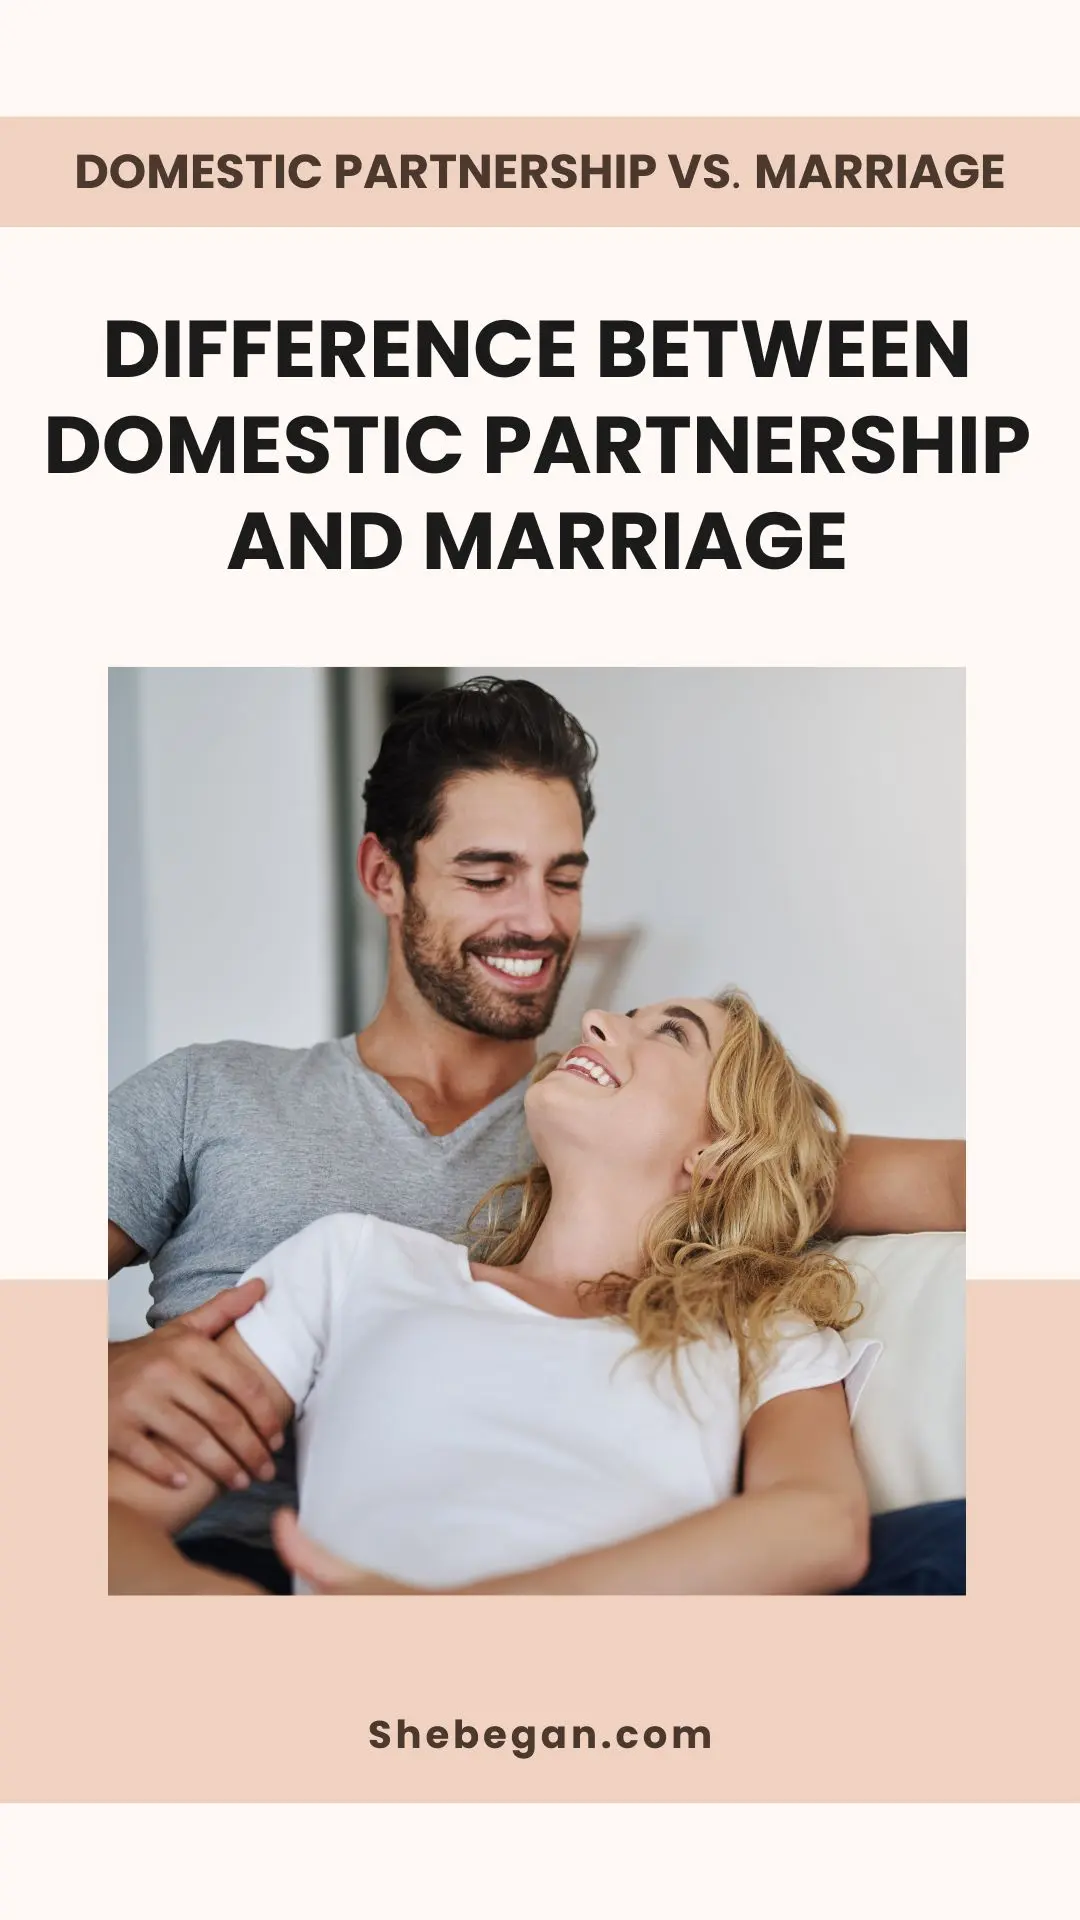 Difference Between Domestic Partnership and Marriage